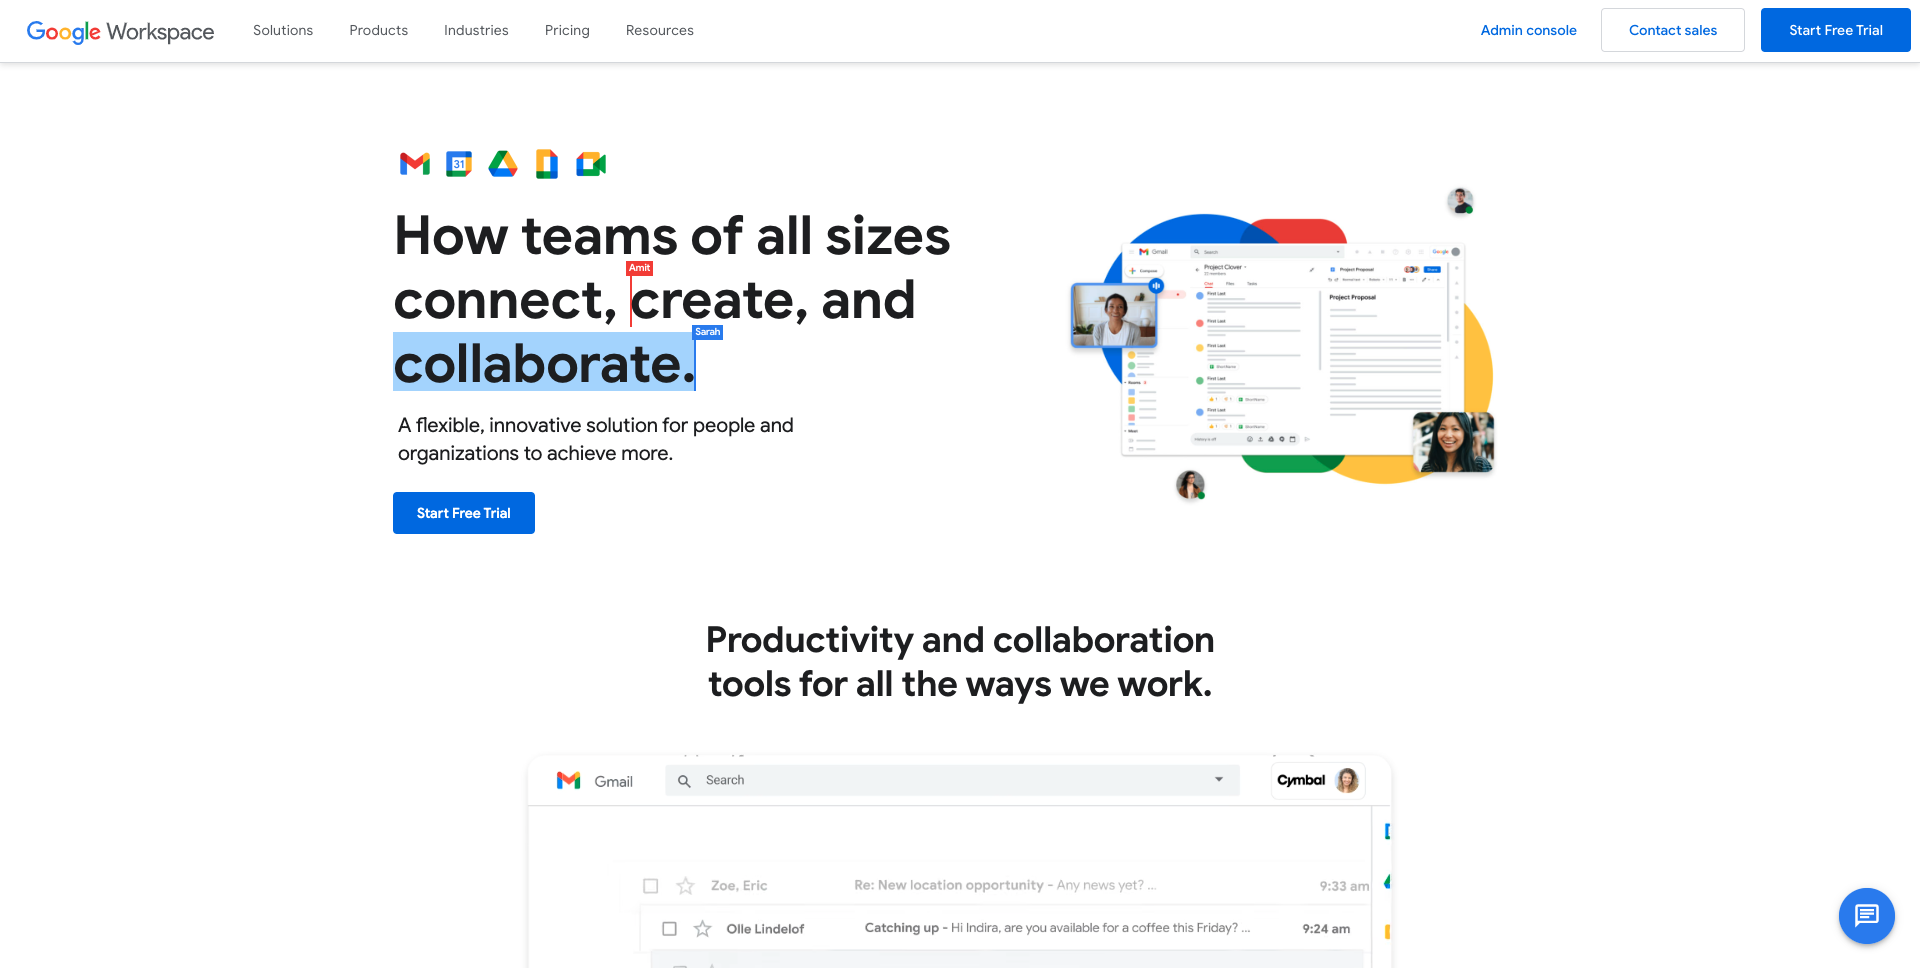 Google Workspace home page